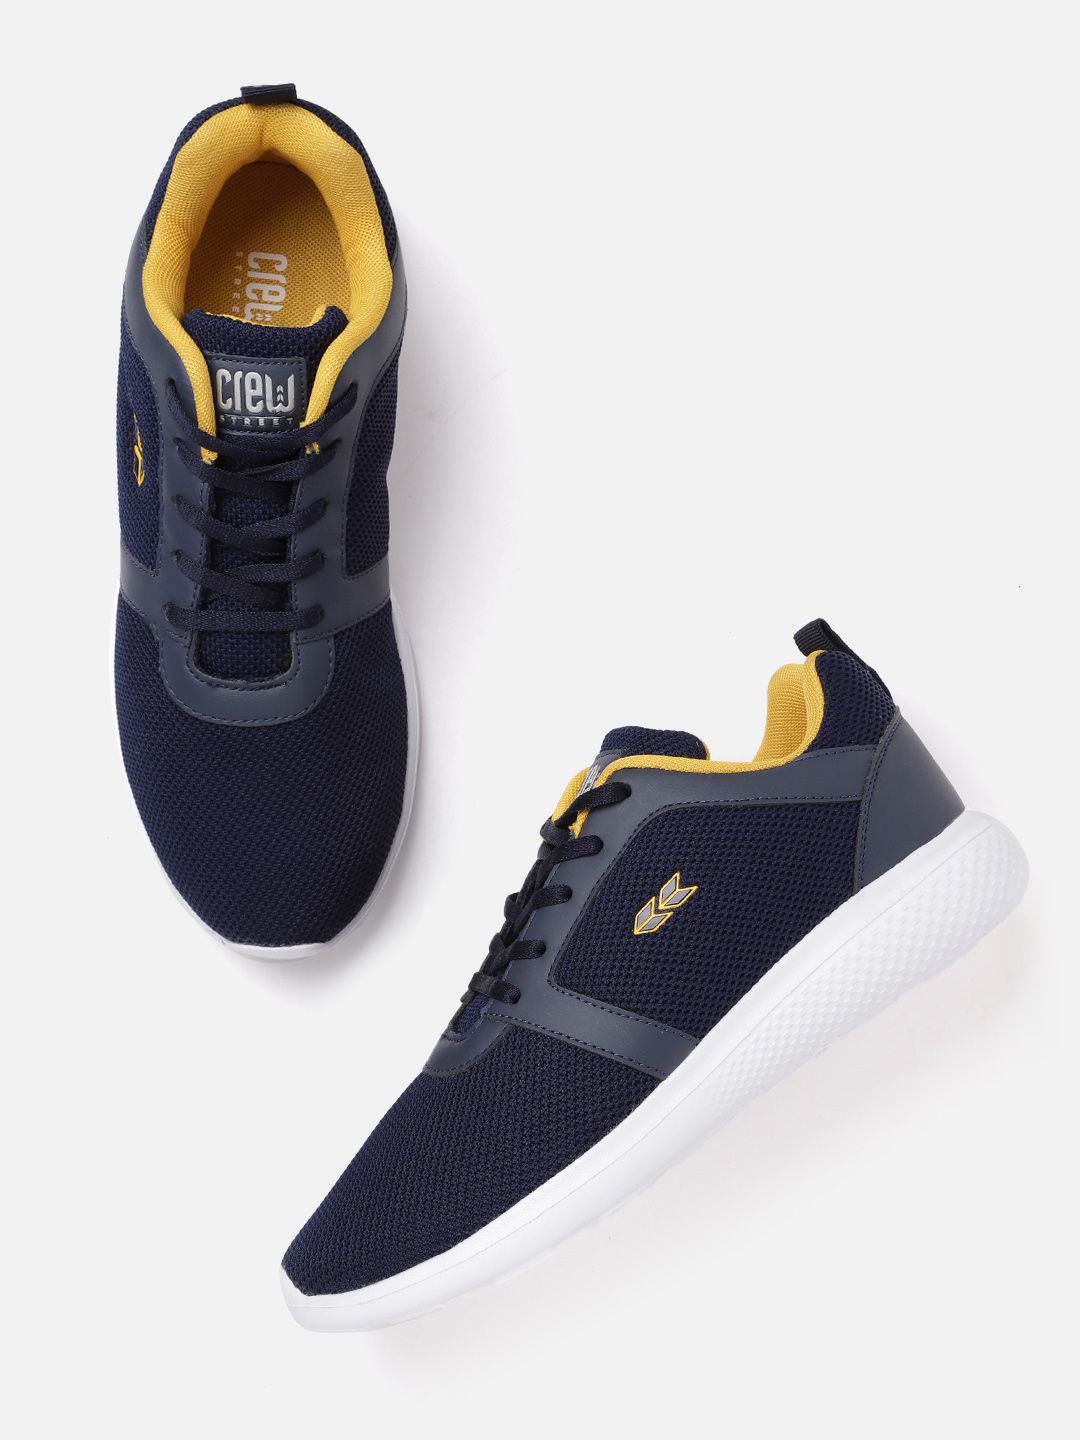 Crew STREET Women Navy Blue Woven Design Running Shoes Price in India